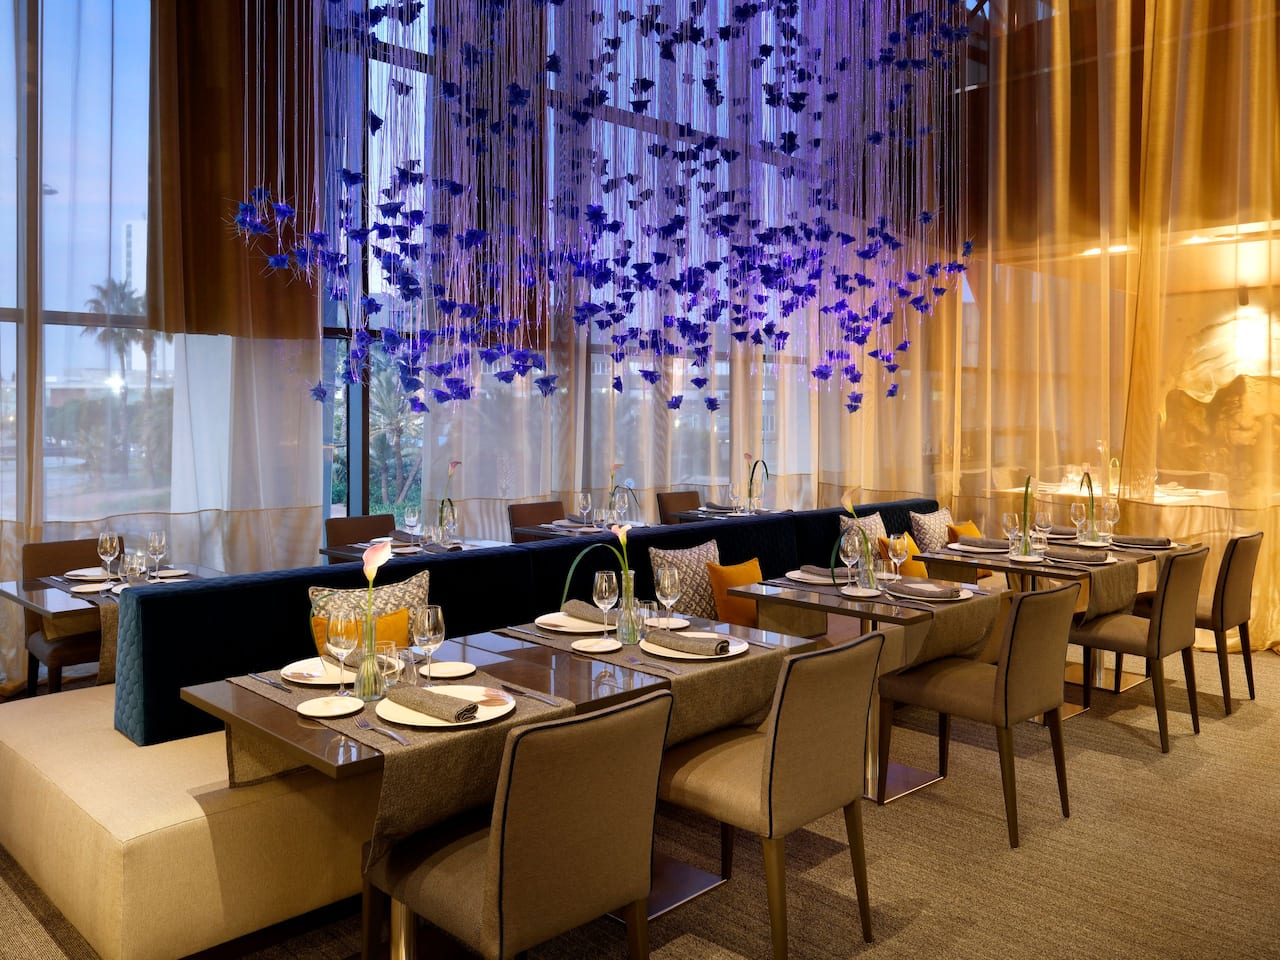 Tables arranged in a unique setting in the Terrum restaurant located on the second floor of our Hyatt Regency Barcelona Tower hotel.